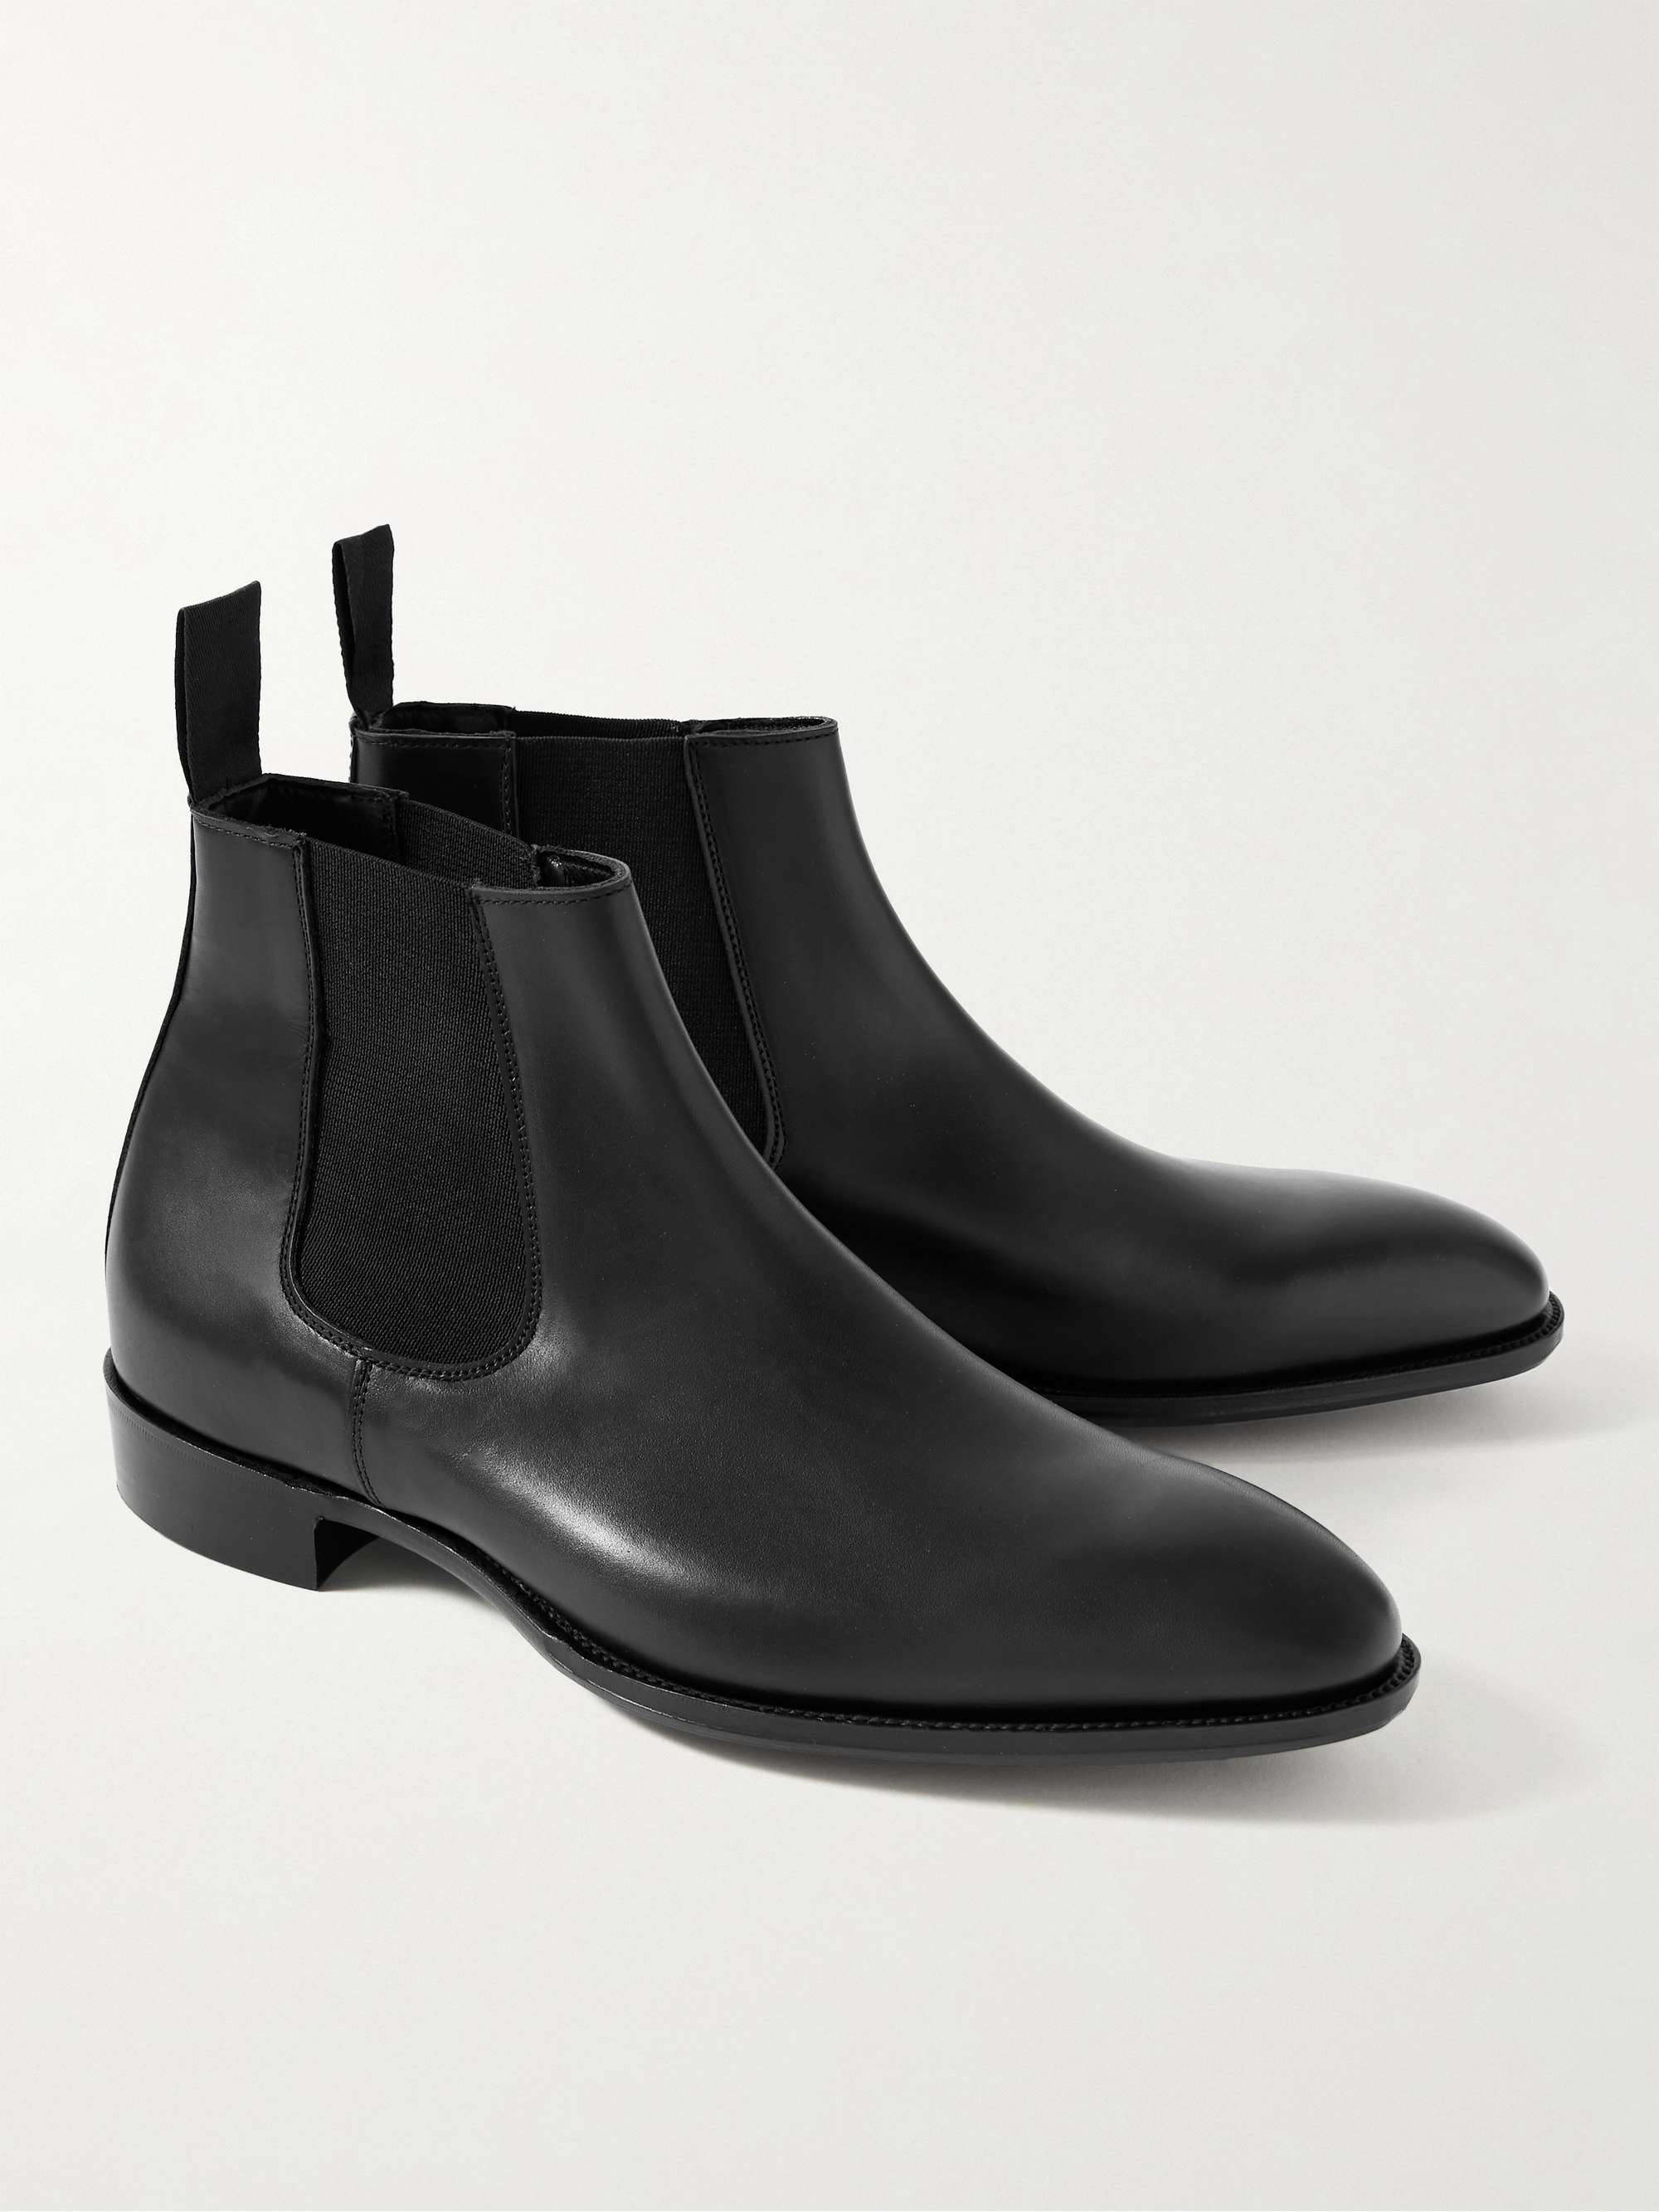 GEORGE CLEVERLEY Jason Leather Chelsea Boots for Men | MR PORTER